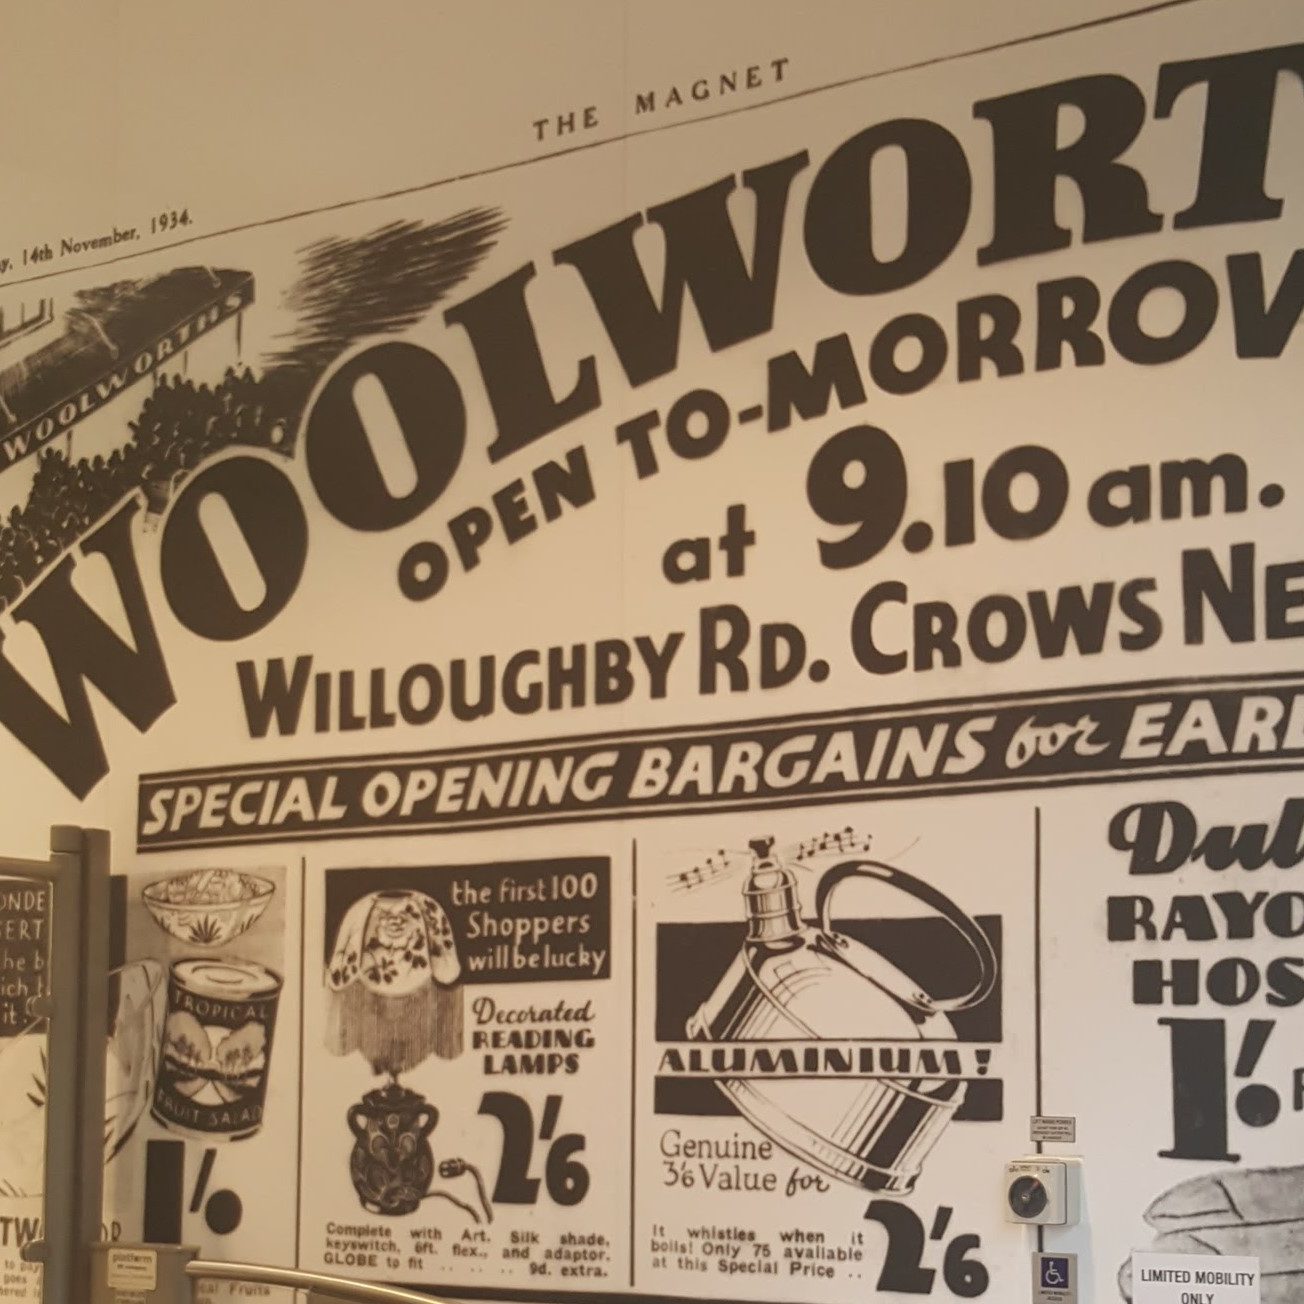 Woolworths Crows Nest